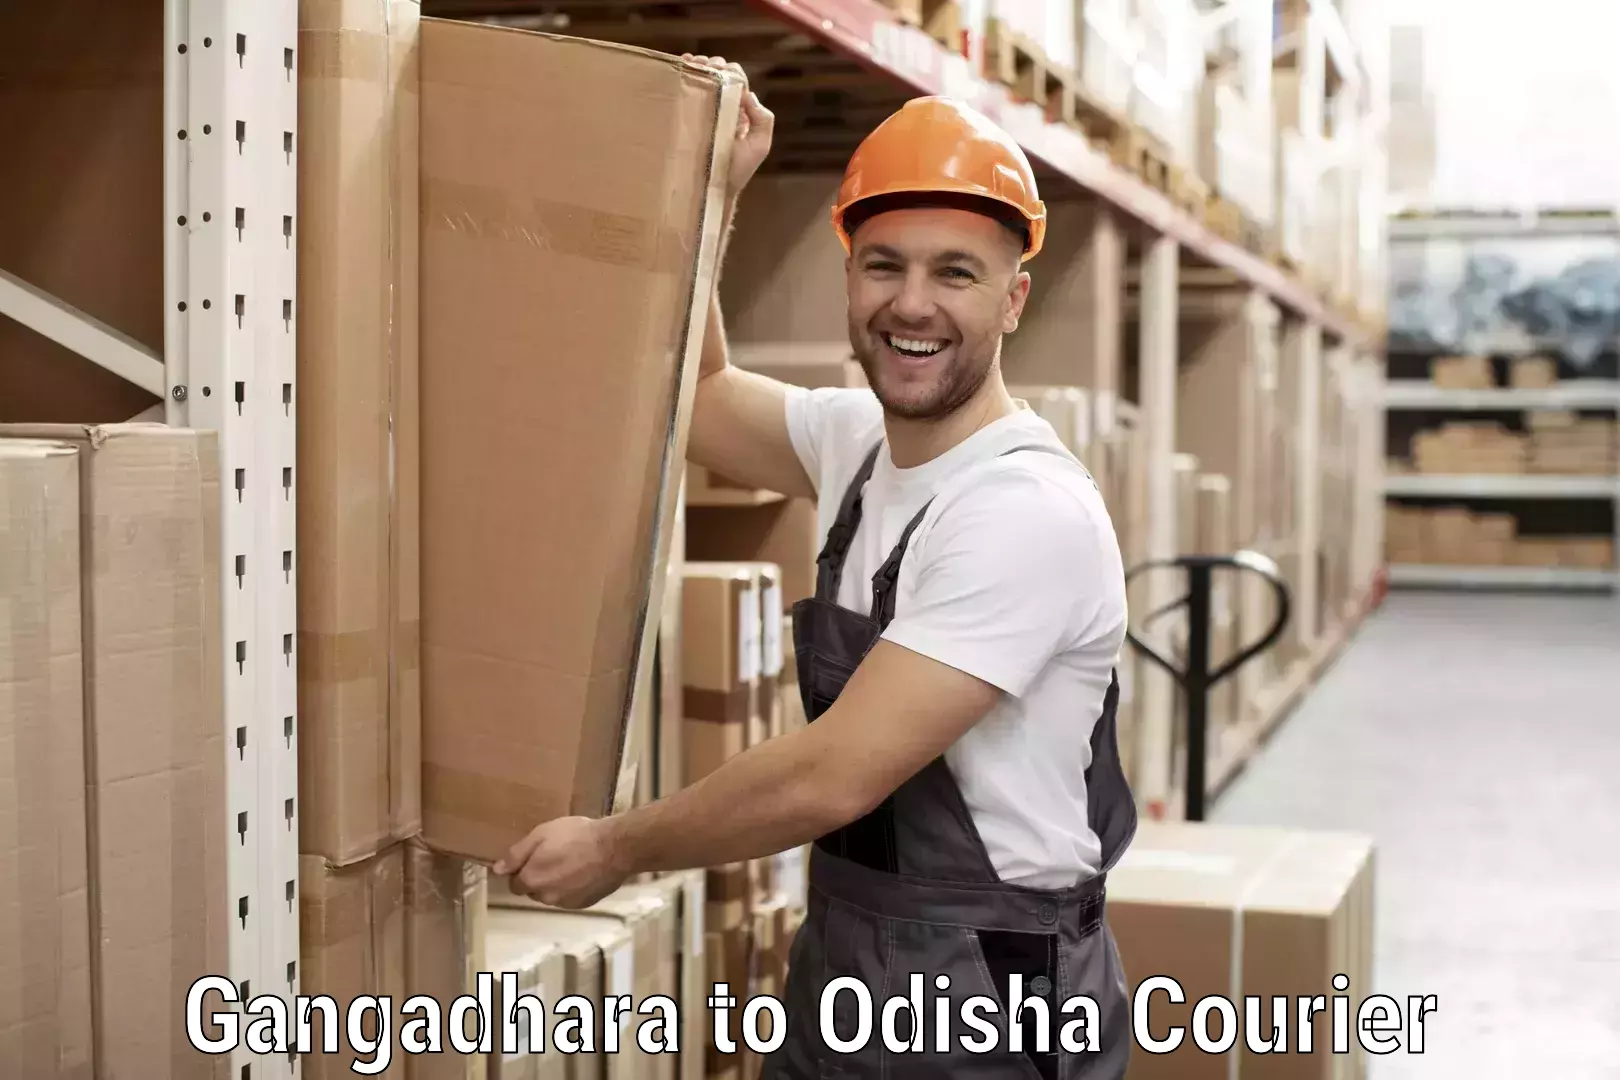 Subscription-based courier Gangadhara to Bissam Cuttack